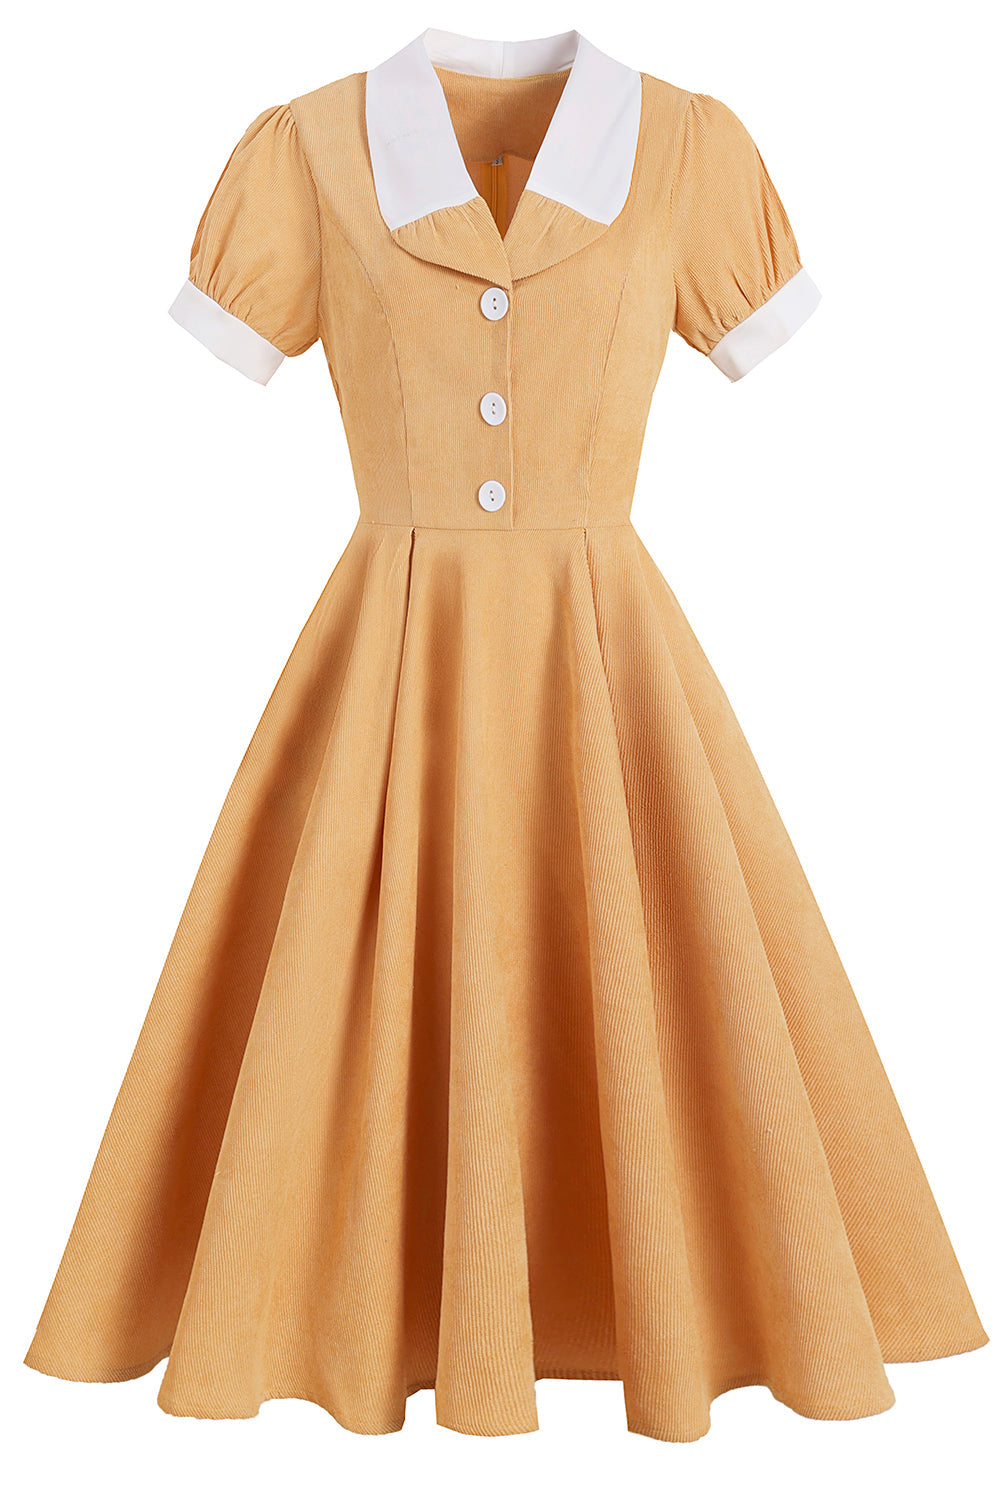 Yellow Vintage Solid 1950s Dress